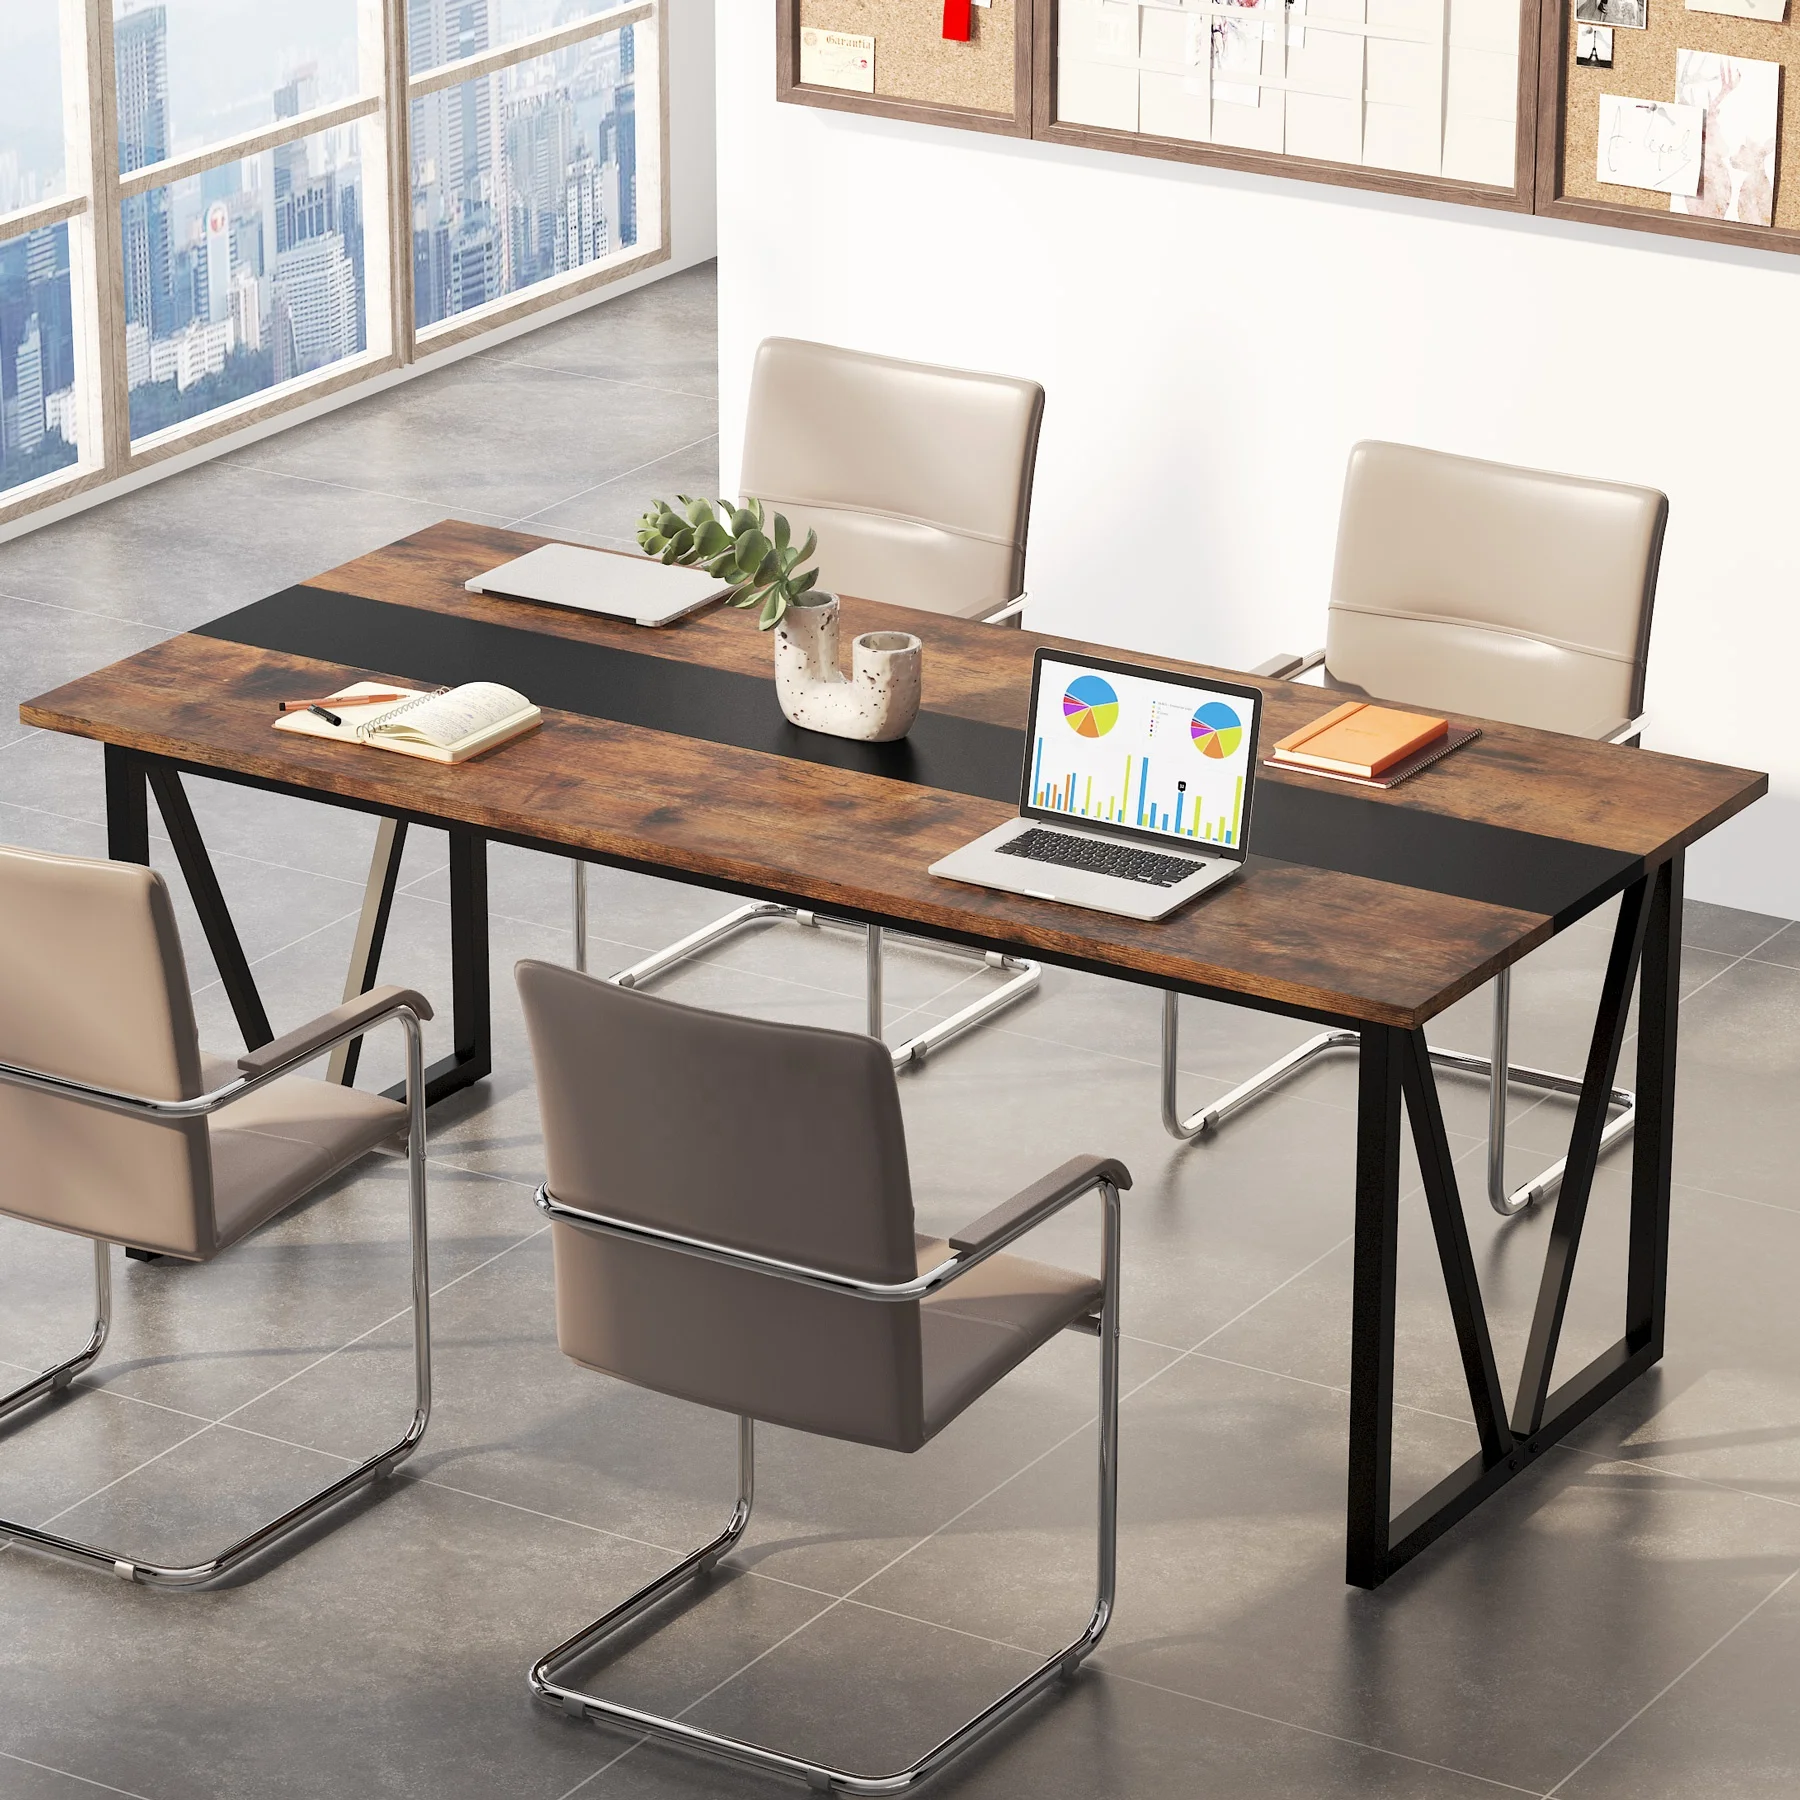 Tribesigns 6FT Conference Table Meeting Seminar Tables for Office Boardroom Desk with Metal Frame